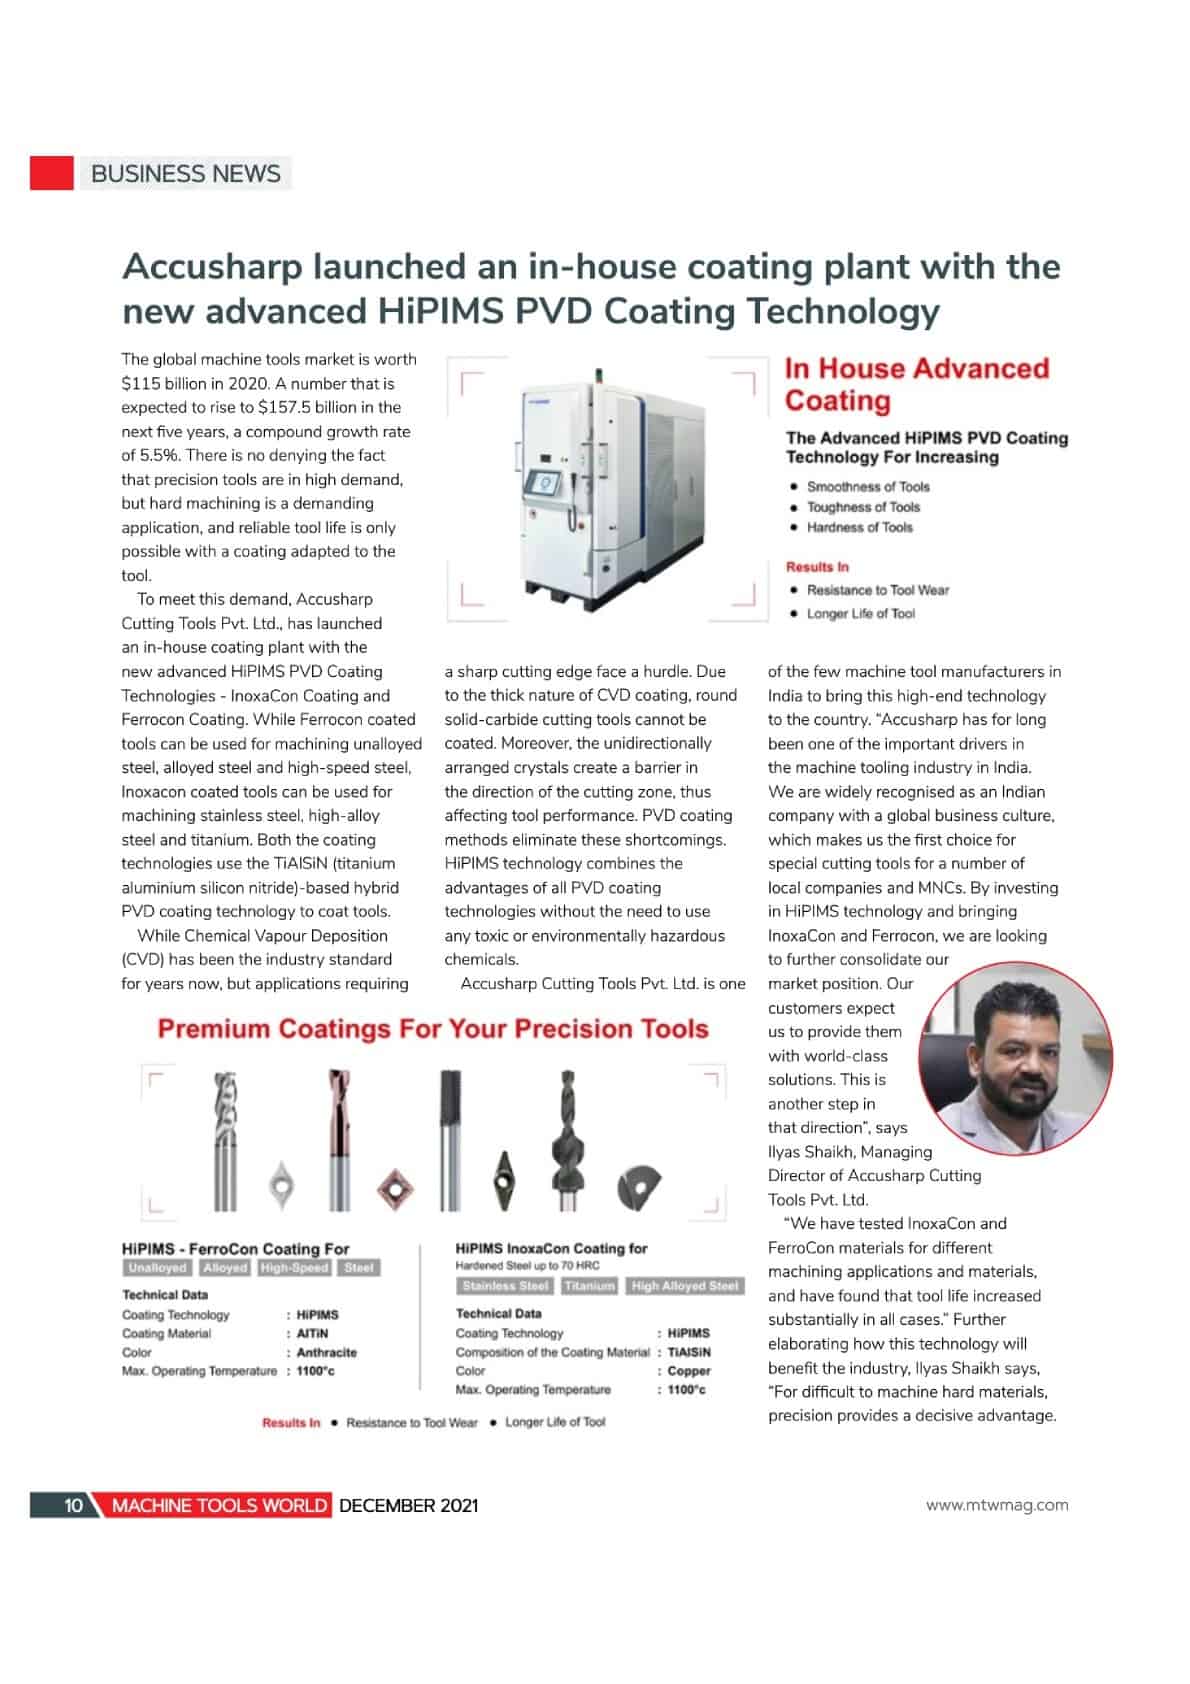 Accusharp launched an In-House Coating Plant with the new advanced HiPIMS PVD Coating Technology